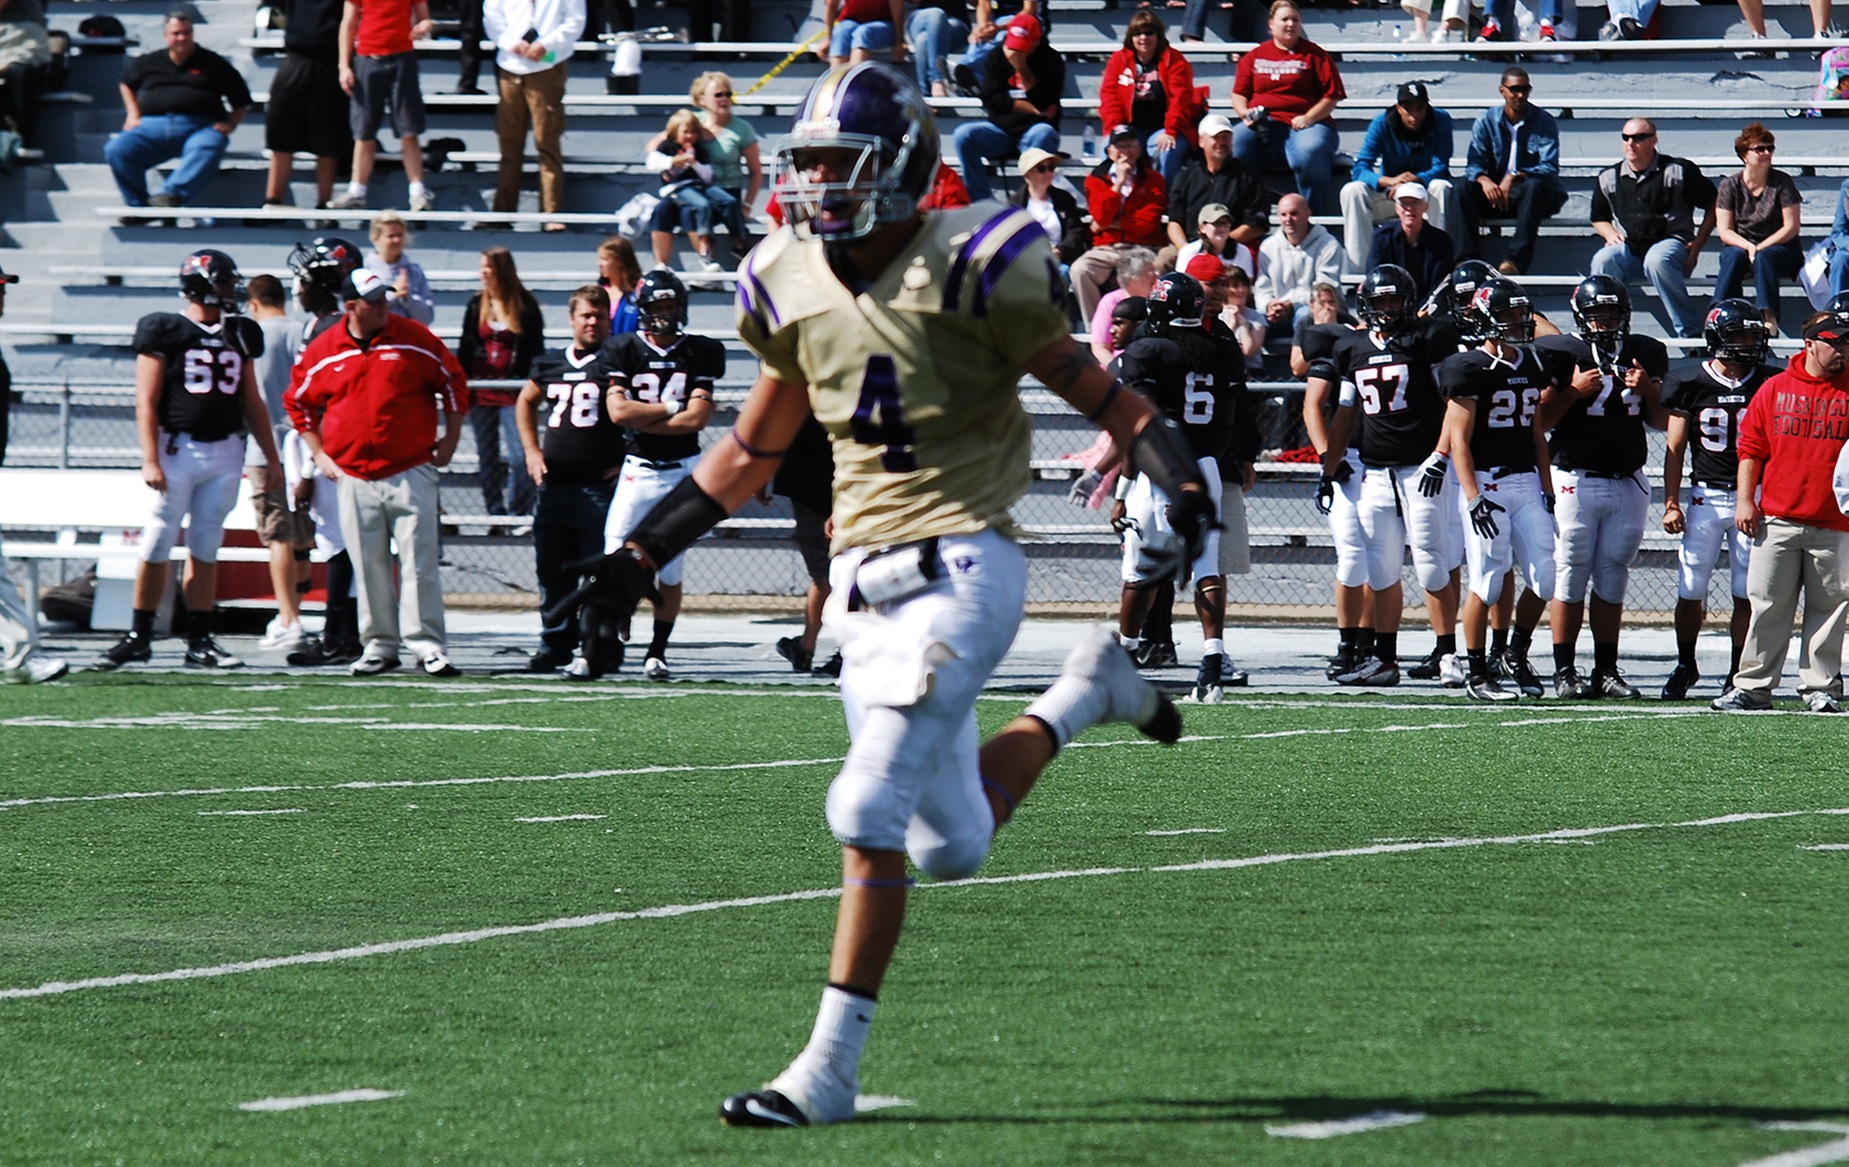 Jackets Lose Double-Overtime Thriller to Open 2010 Campaign